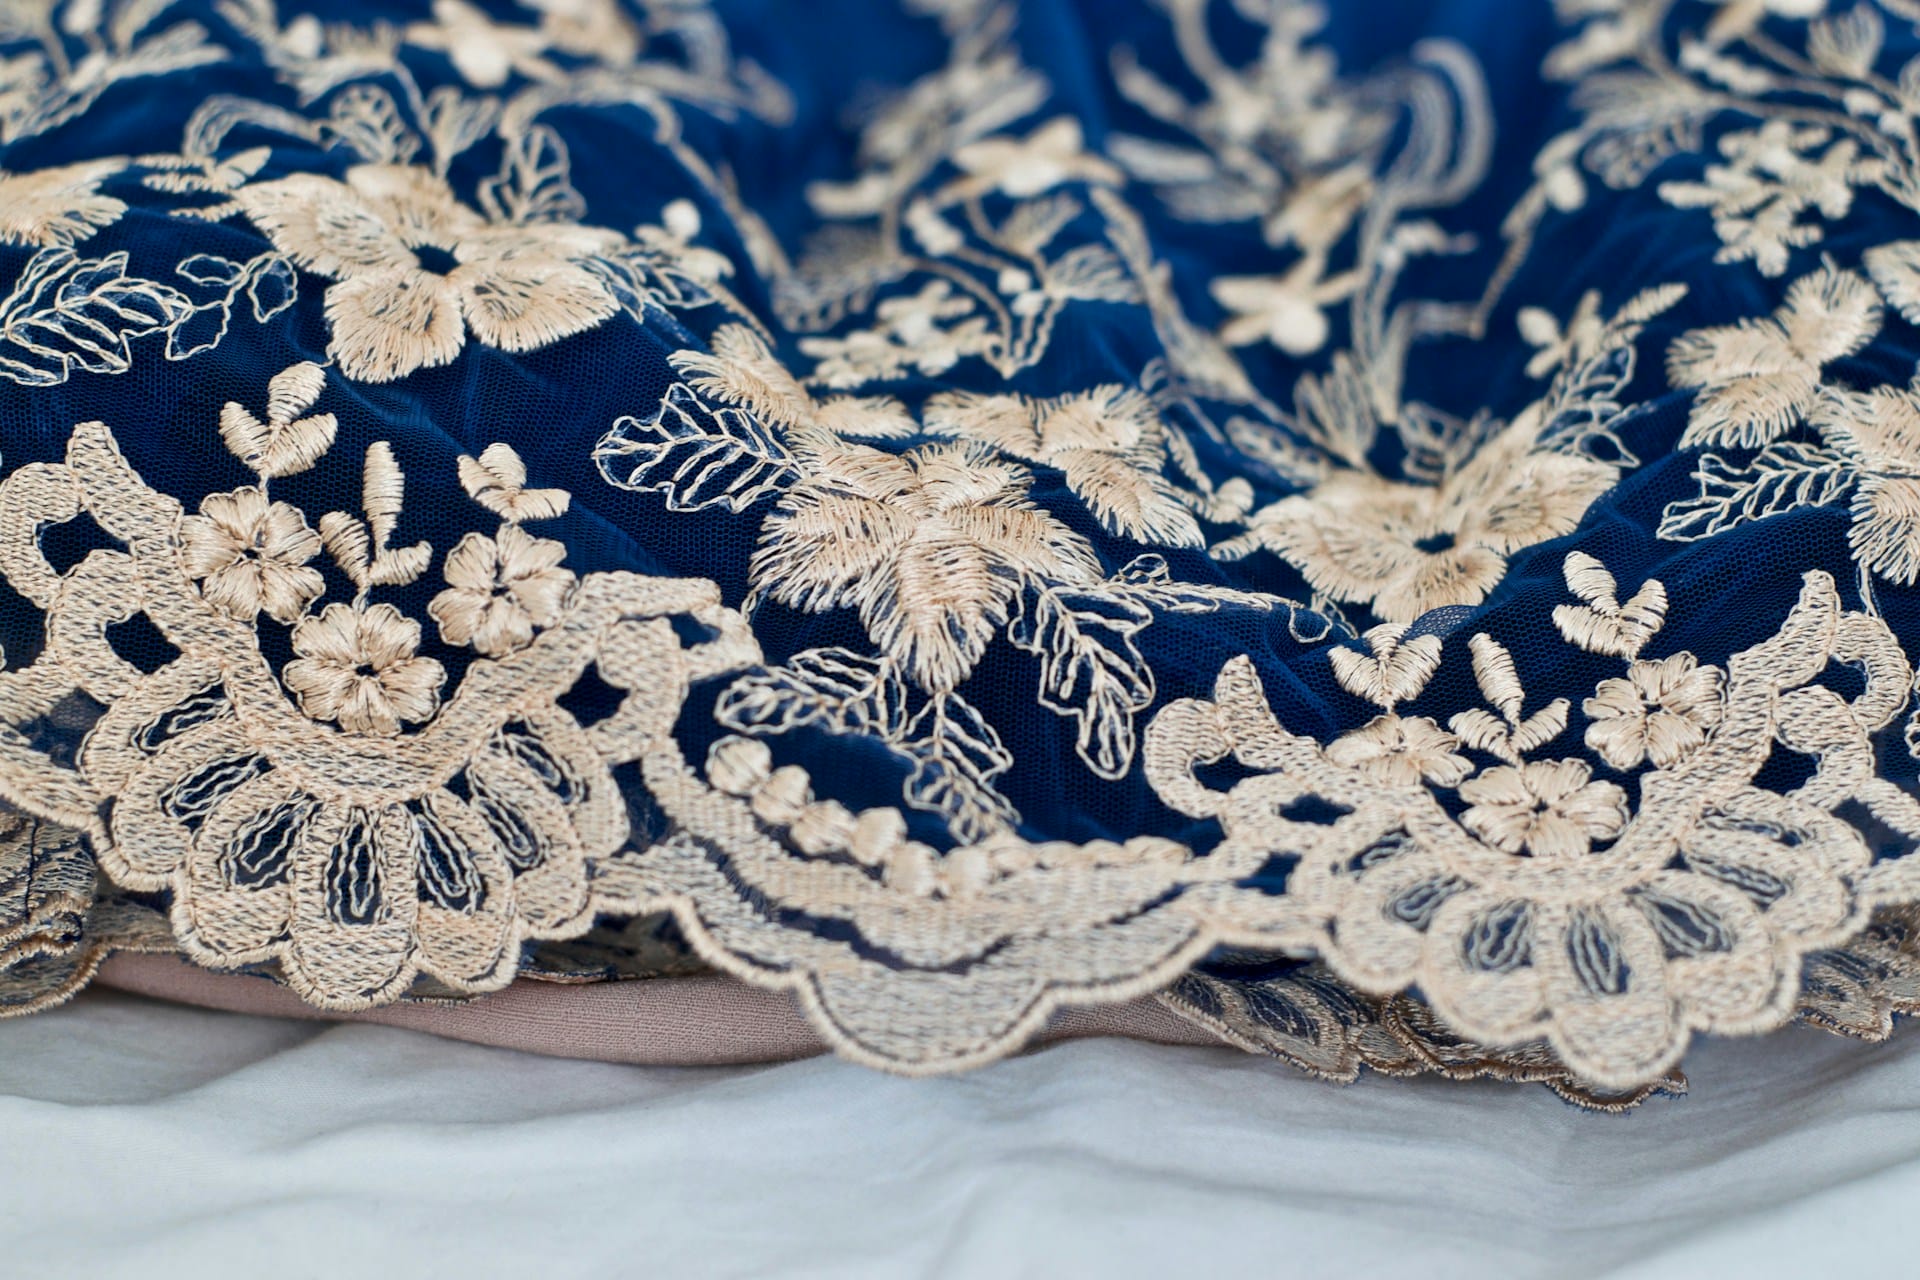 A close up of a blue and beige embroidered lace dress.